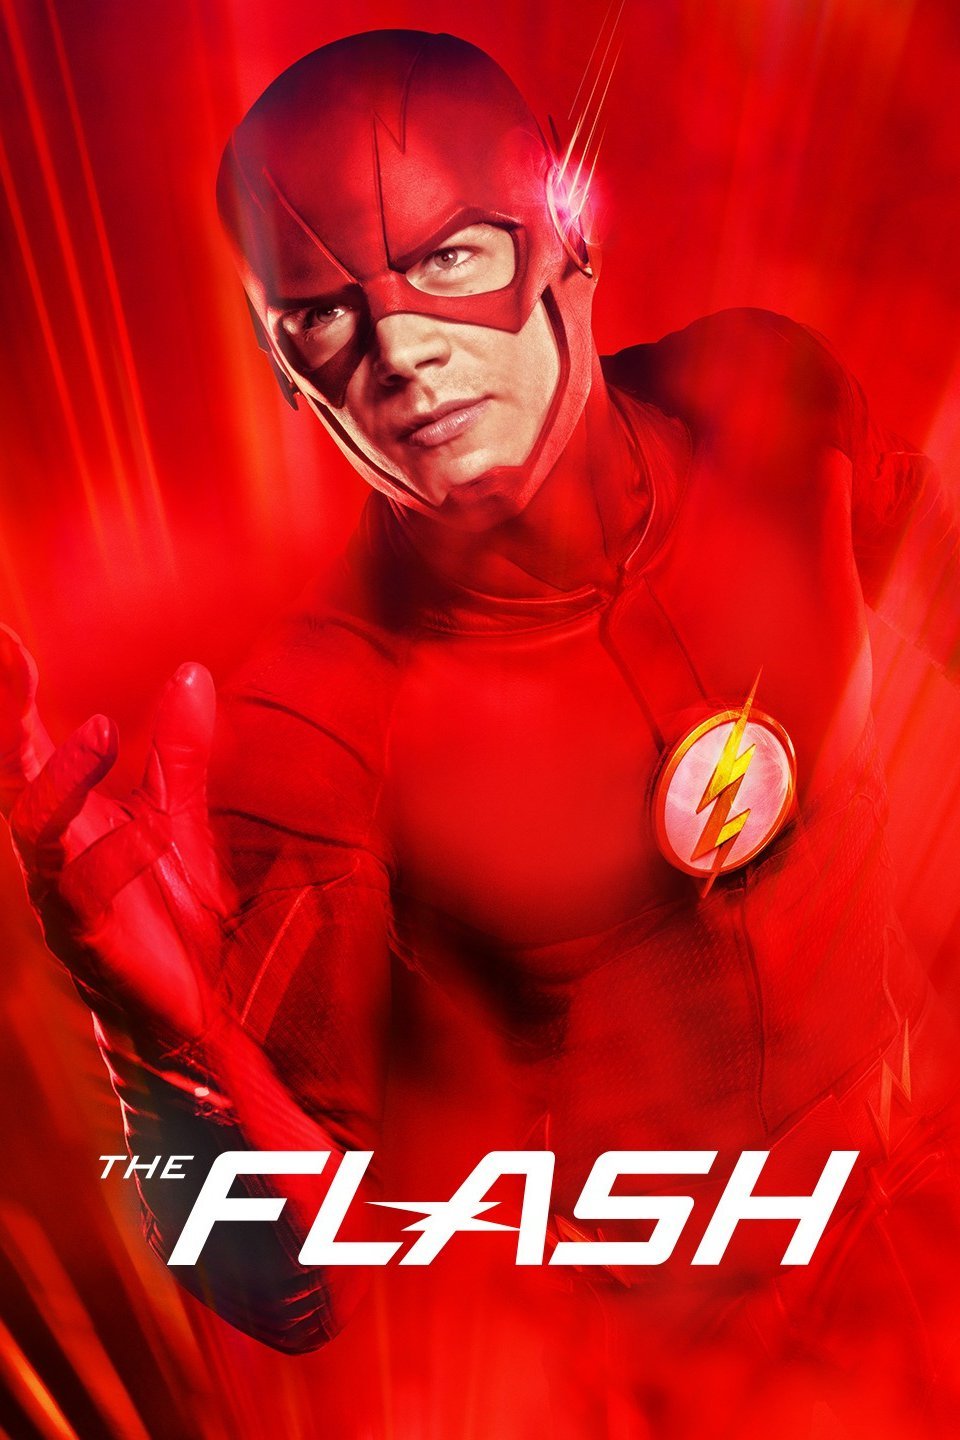 The Flash 3 Episode 1 (Flashpoint)